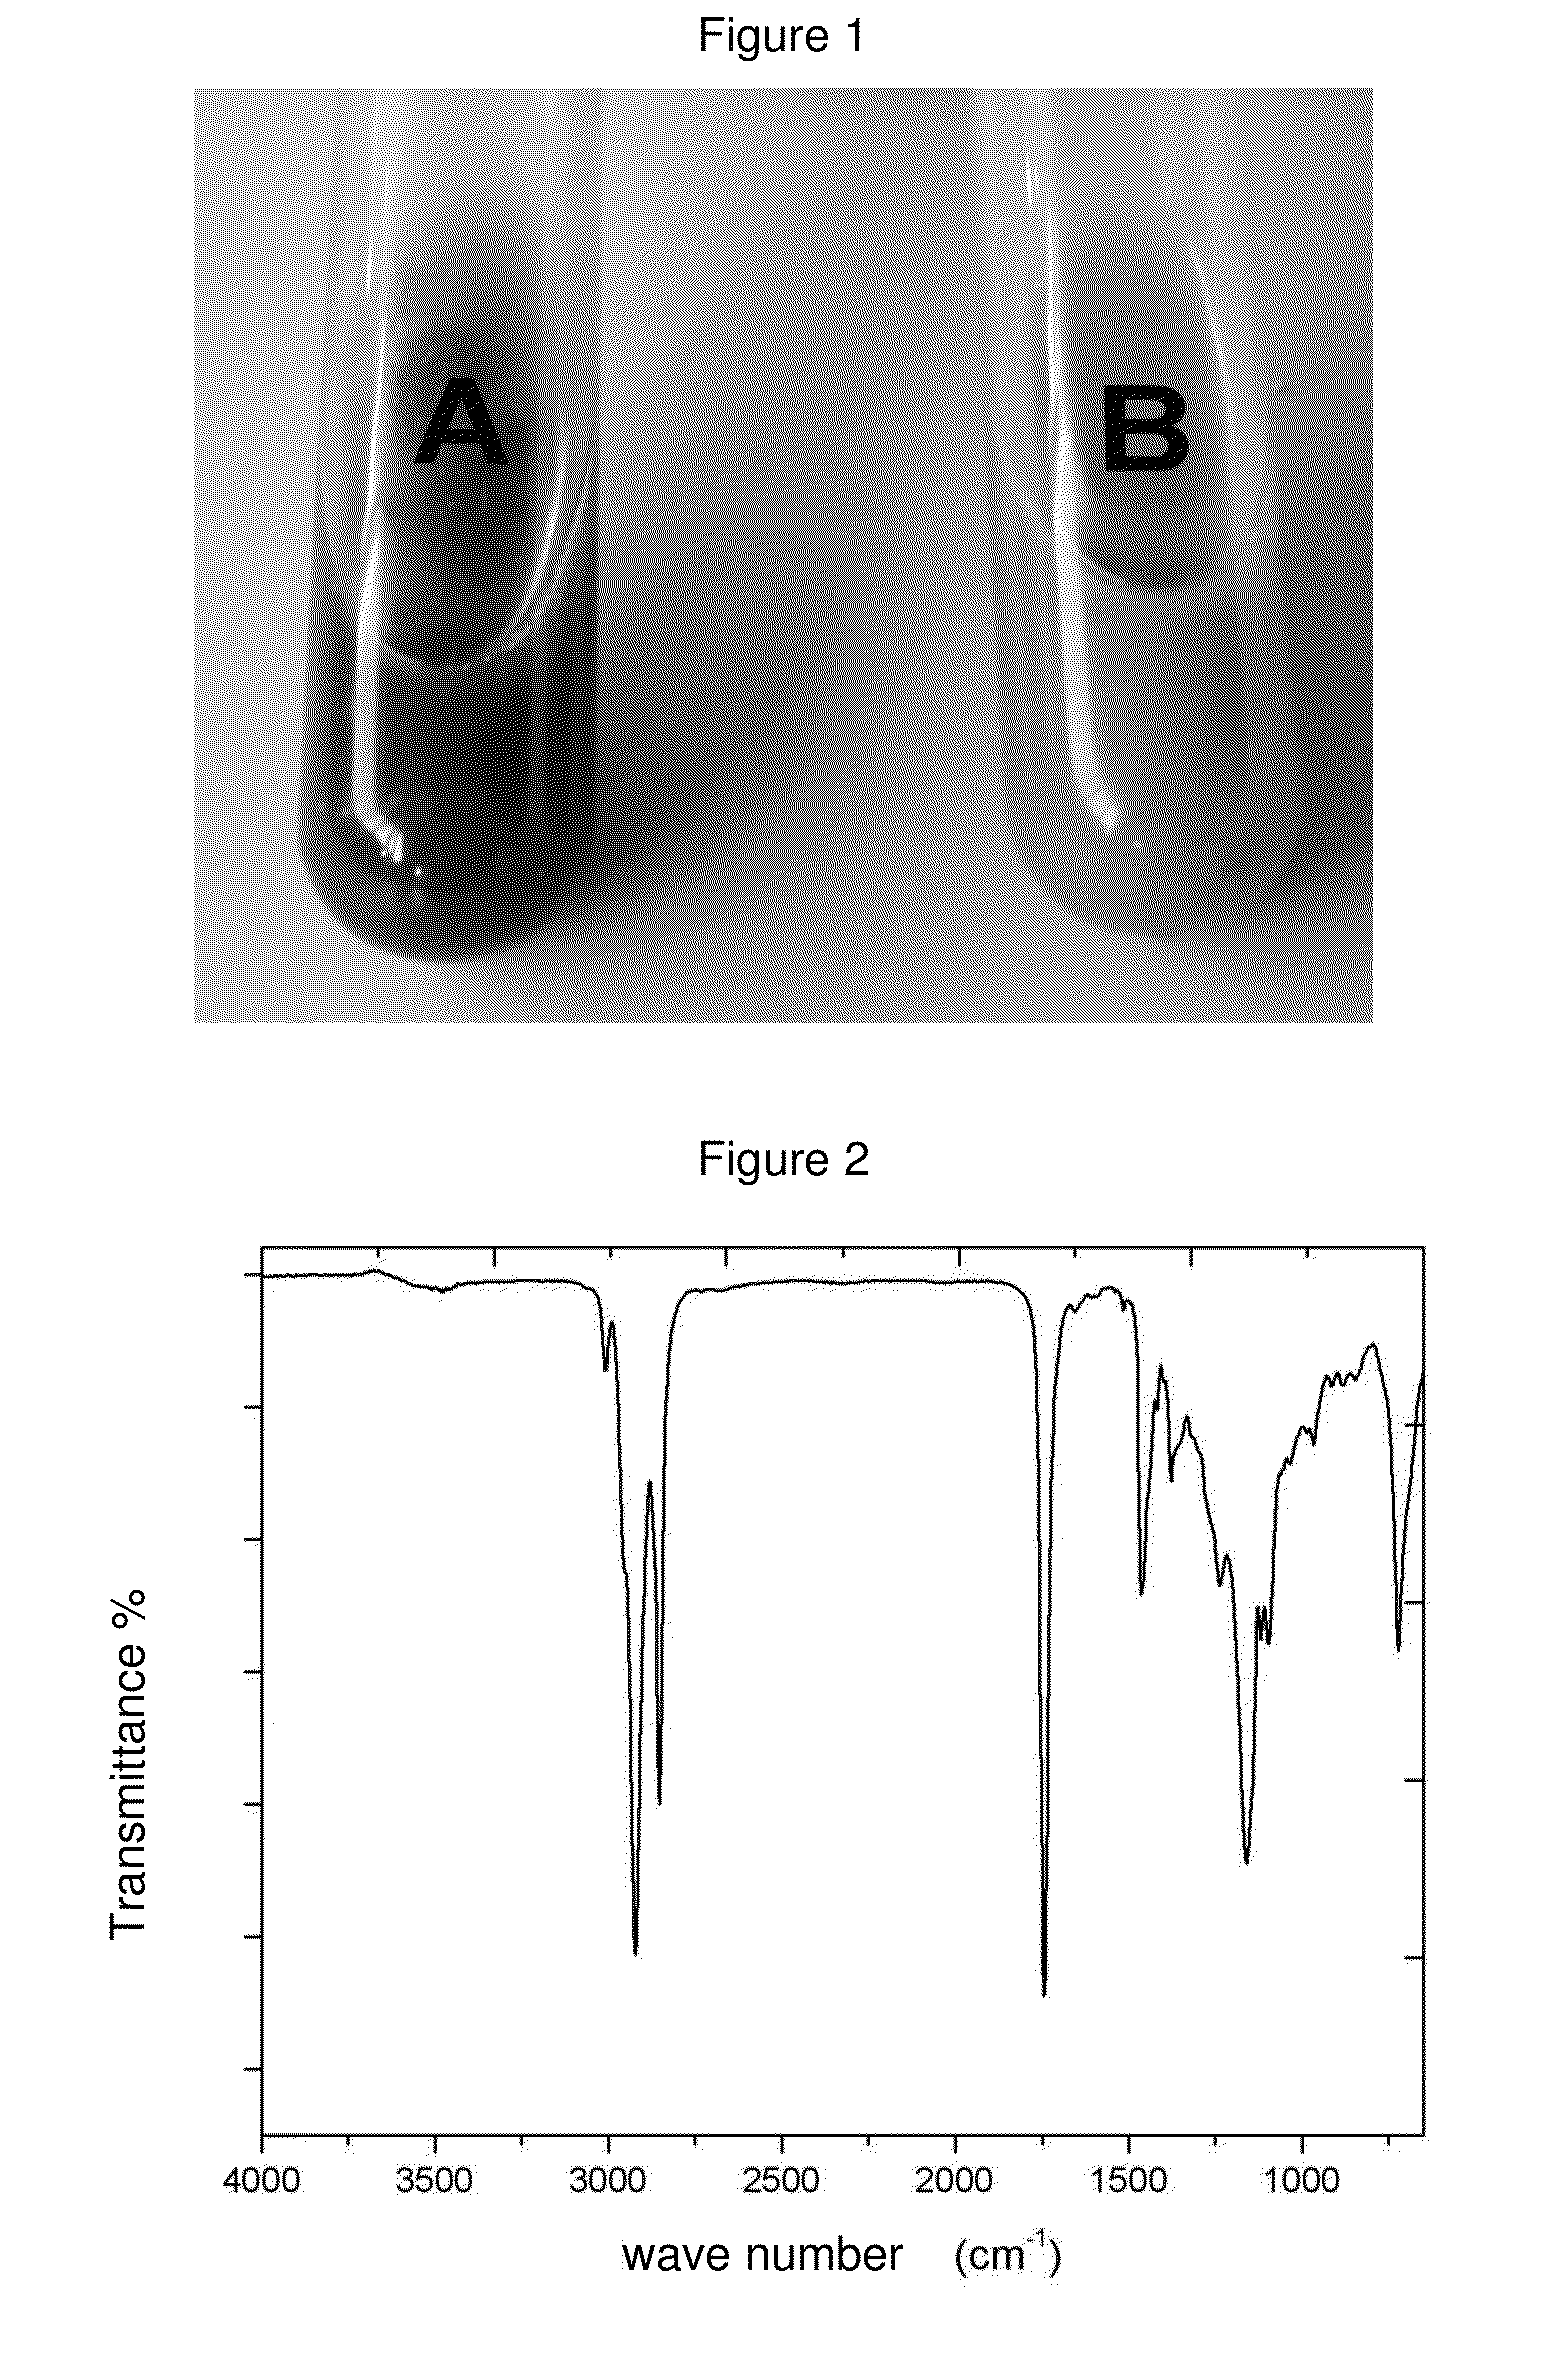 Composition containing resveratrol and/or derivatives thereof and plant oil, process for producing said composition, nutraceutical and/or pharmaceutical product, and method for enhancing the potential of resveratrol